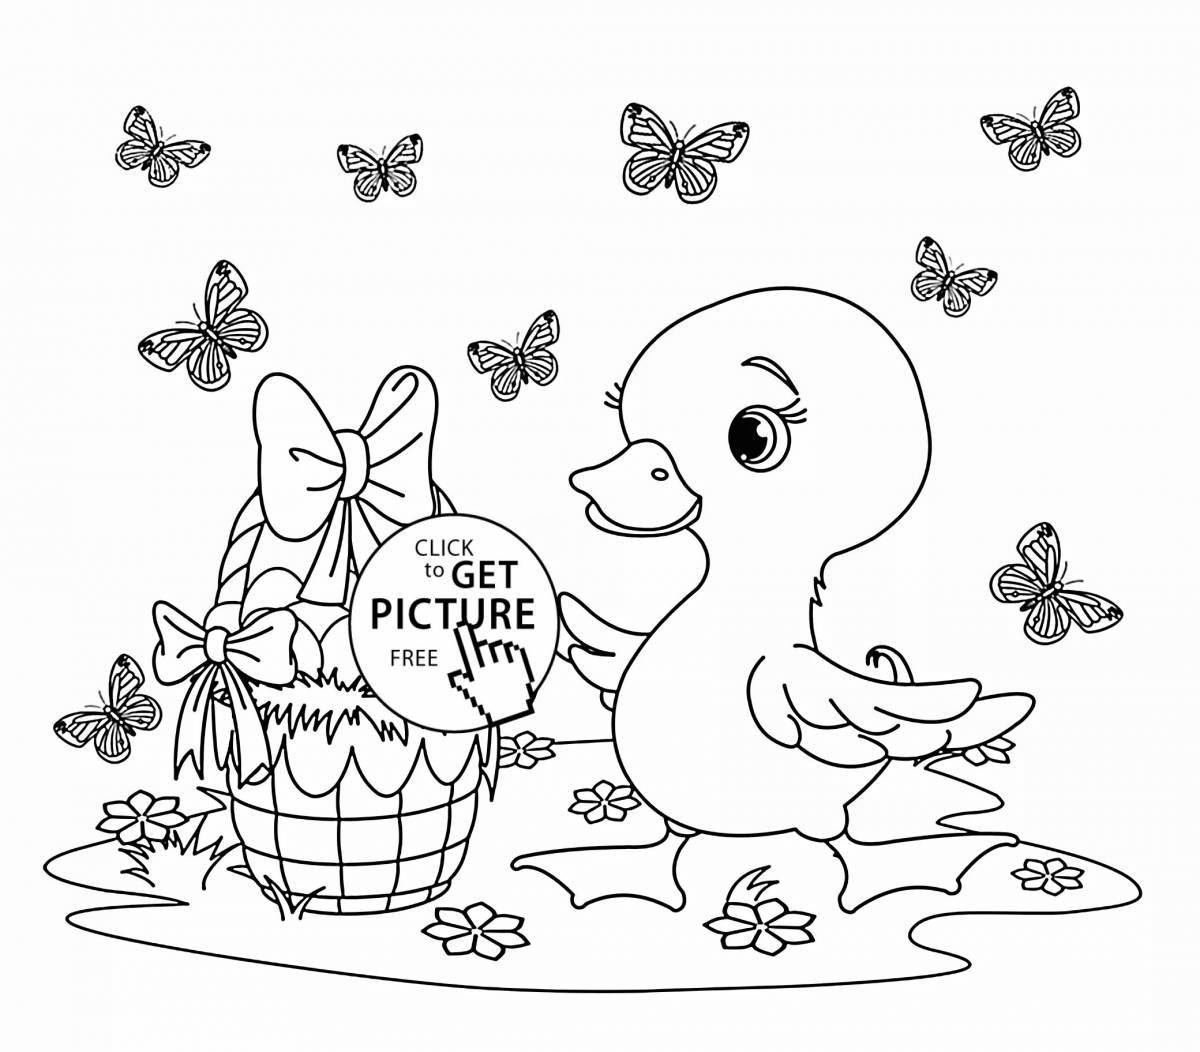 Great duck coloring book for girls